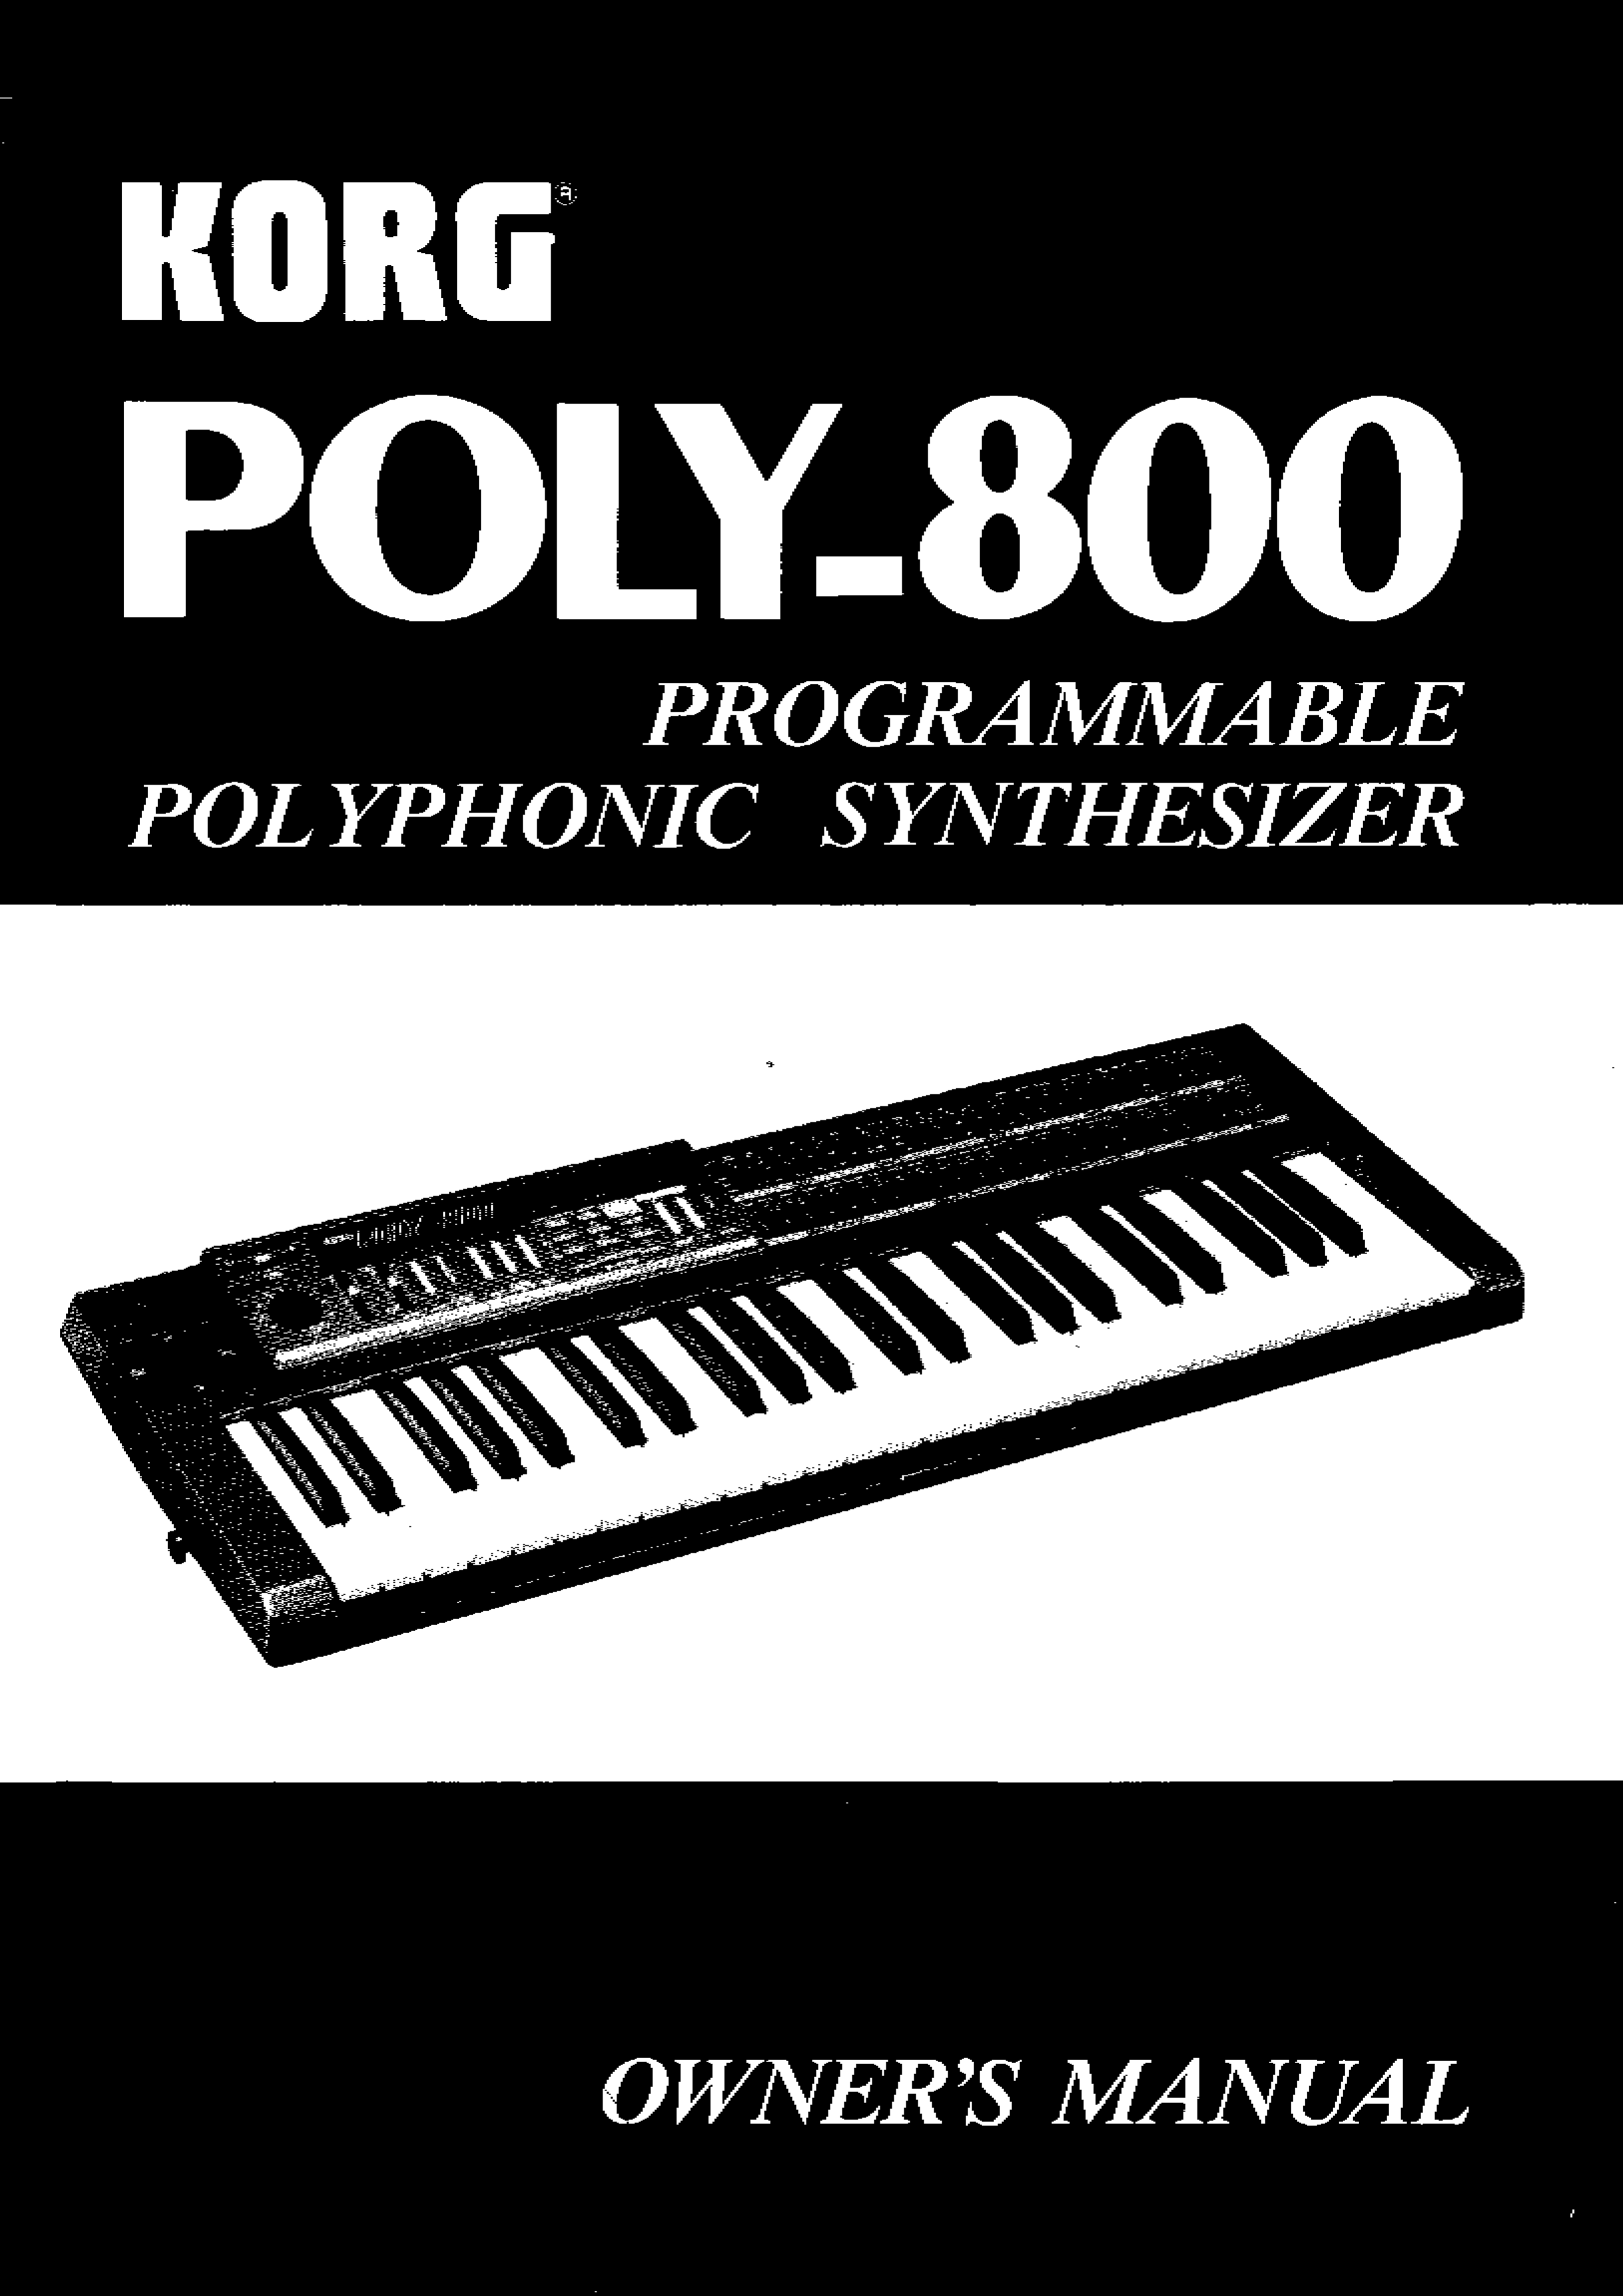 weight of korg poly 800